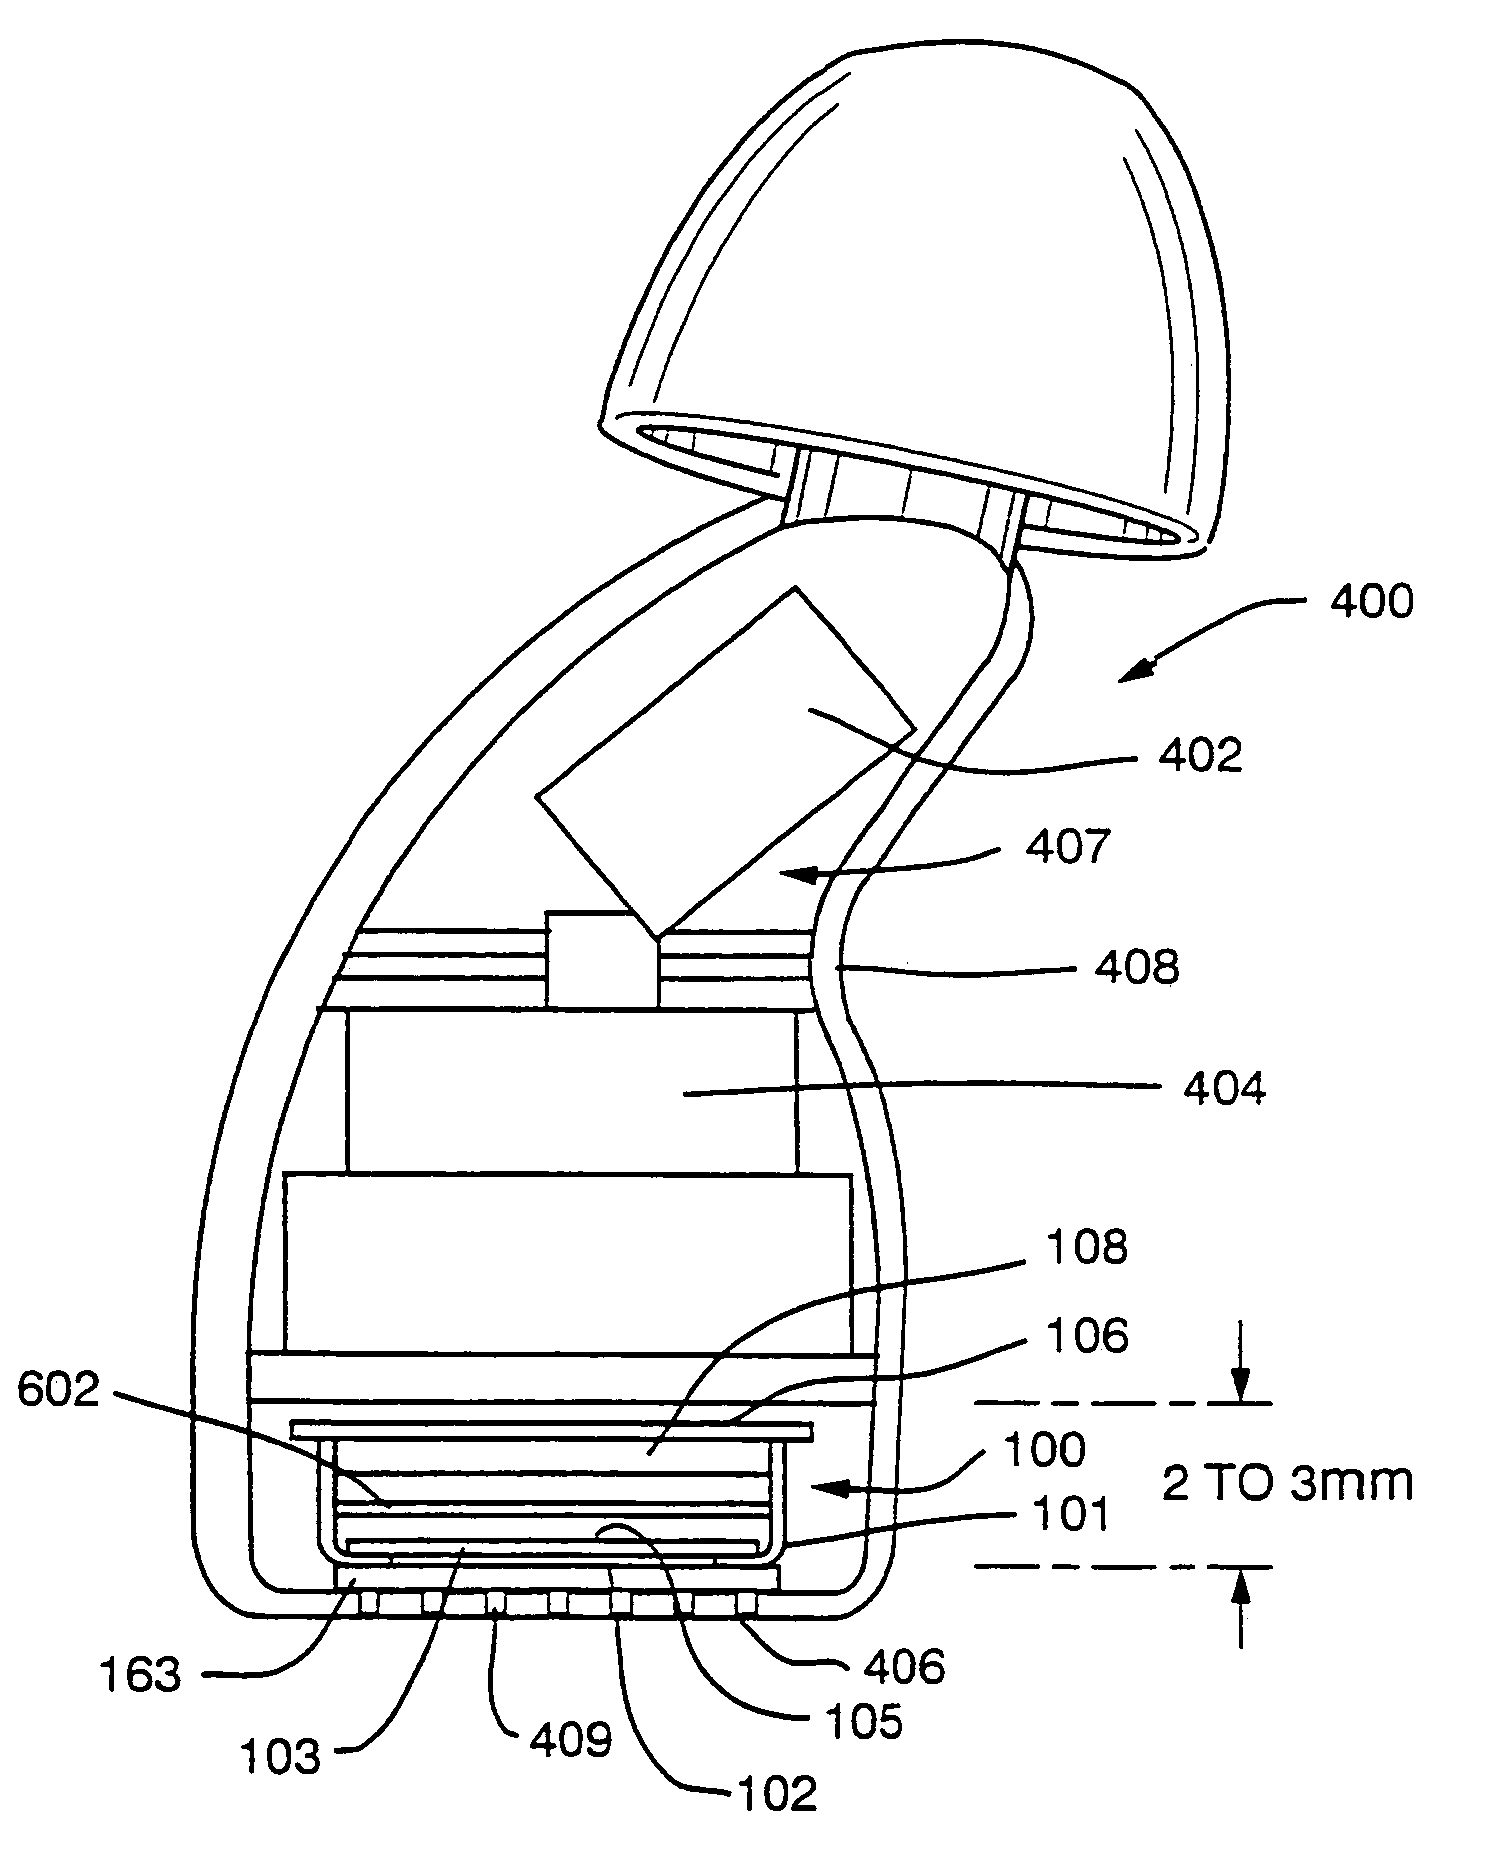 Hearing aid with large diaphragm microphone element including a printed circuit board